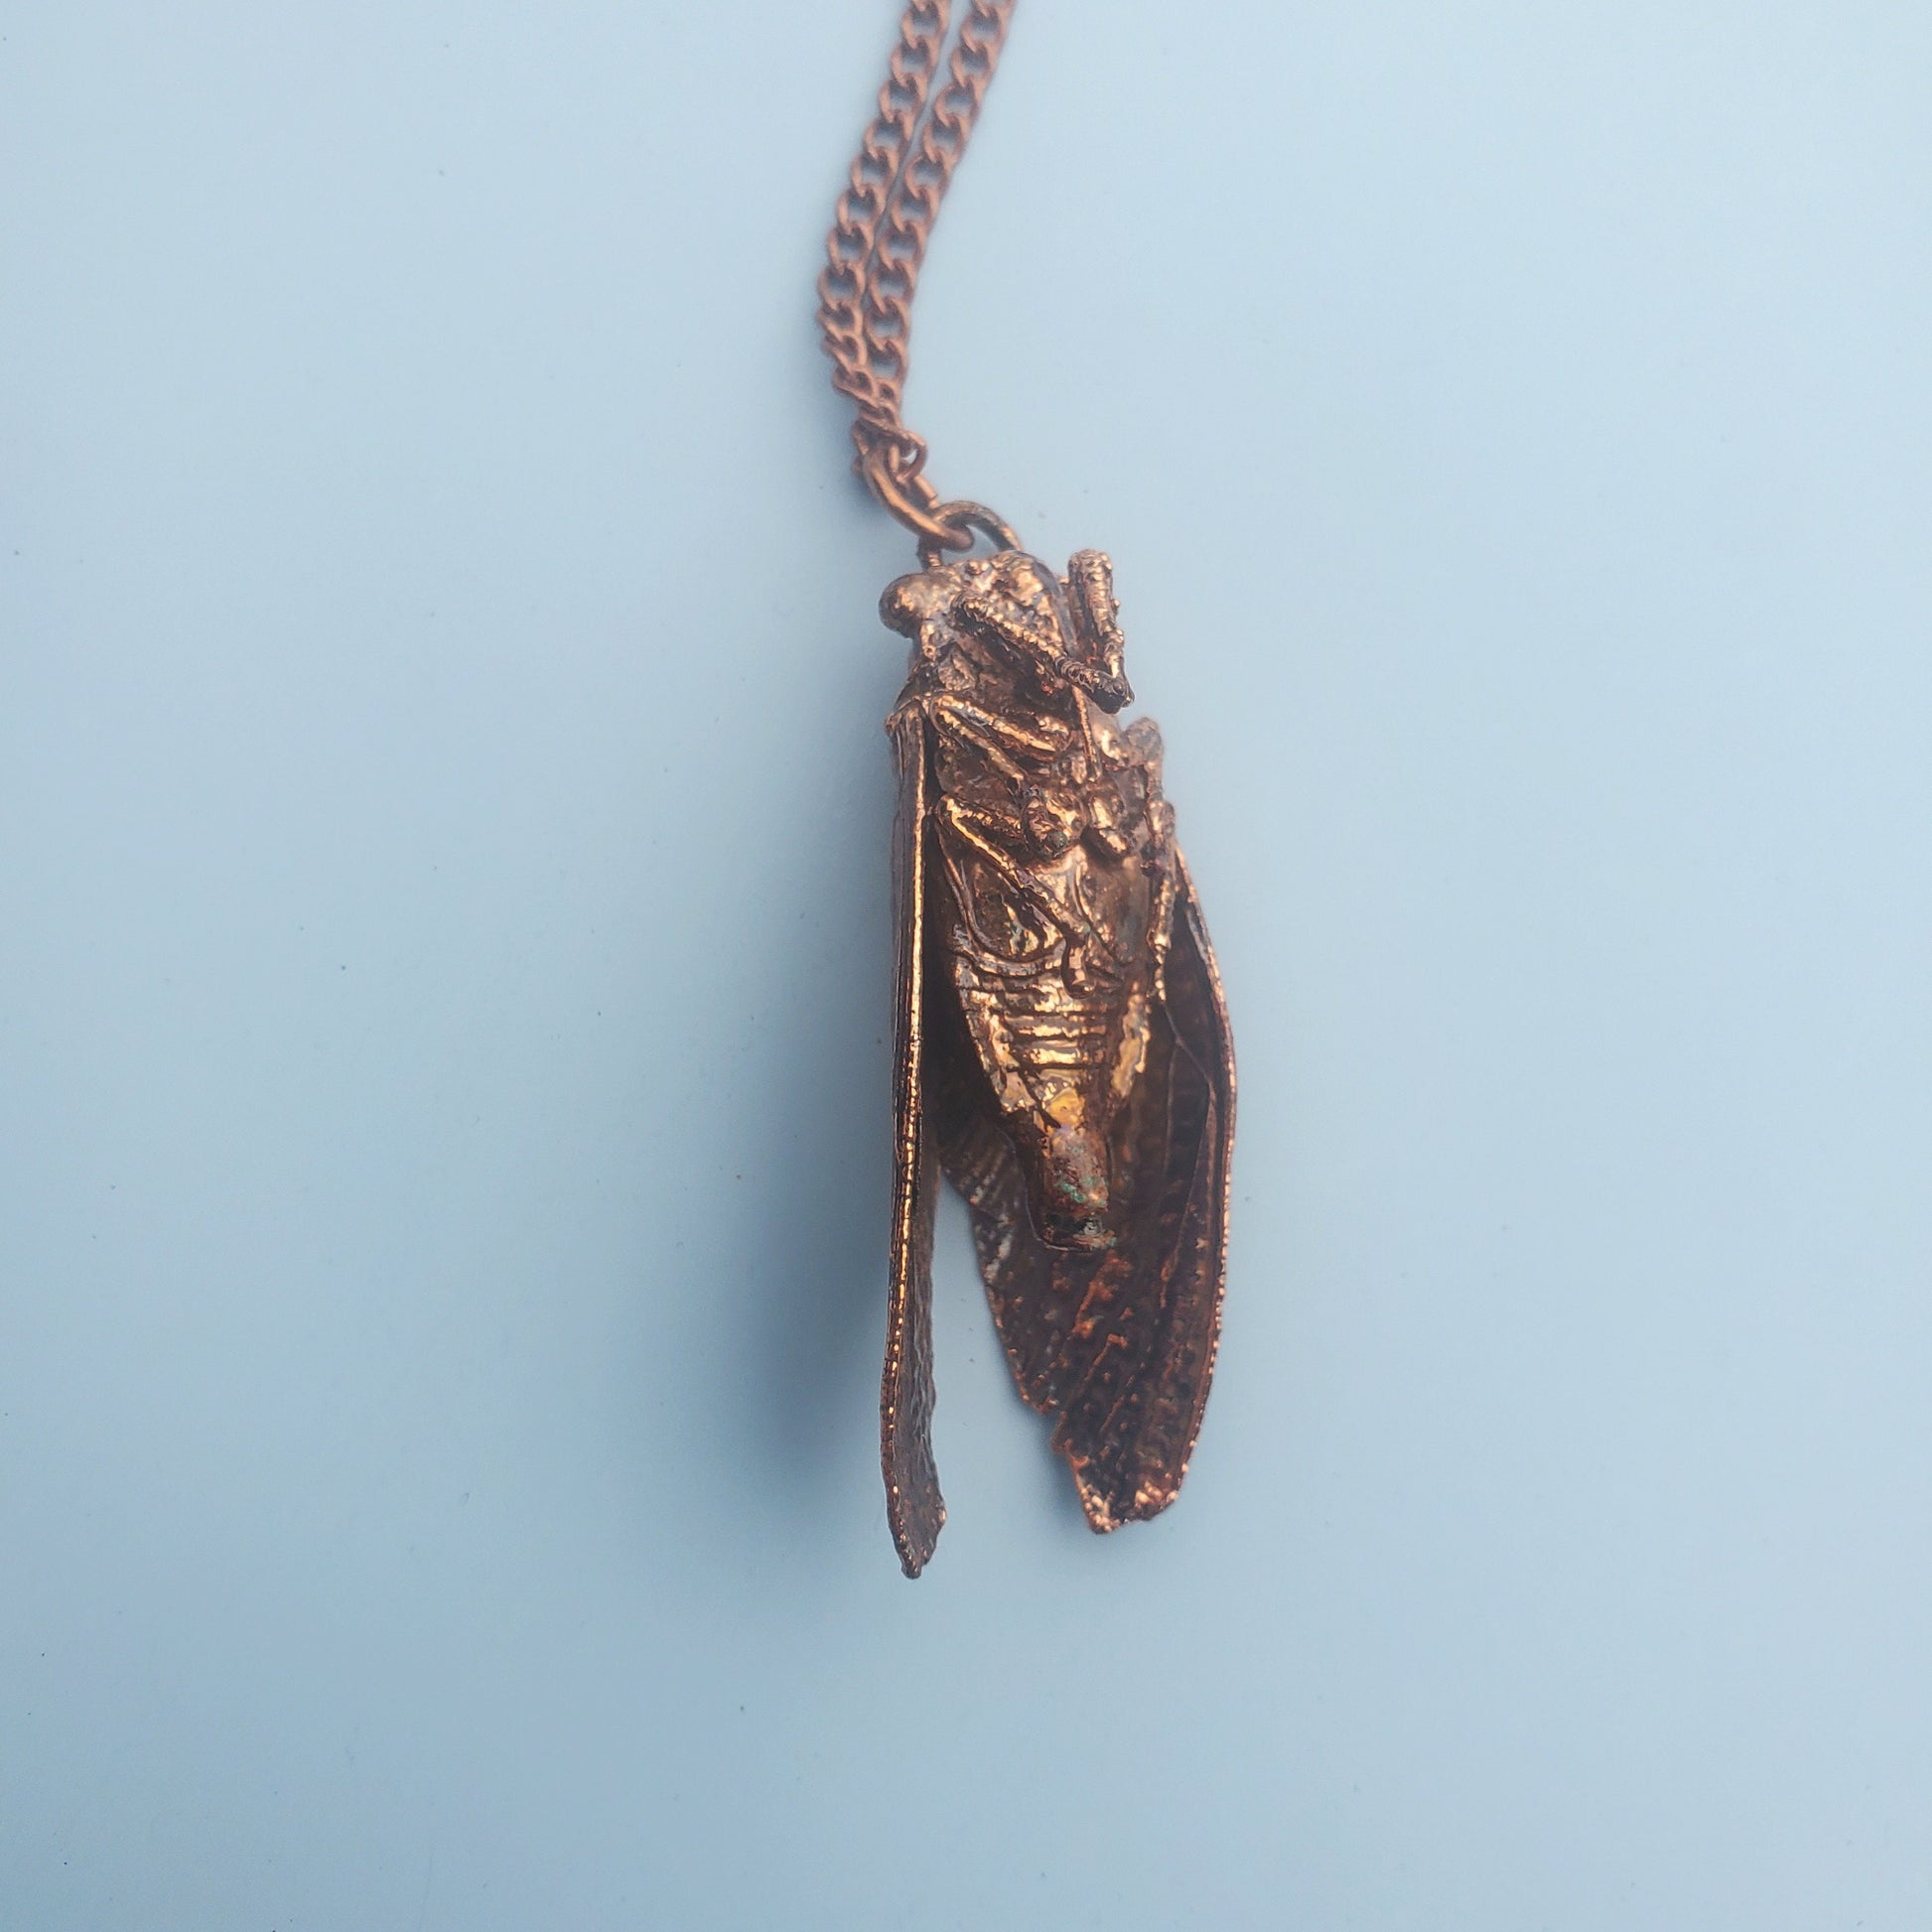 Copper Plated Cicada Necklace Real Cicada Necklace Real Bug Necklace Shiny Copper Electroformed Necklace Gothic Oddities